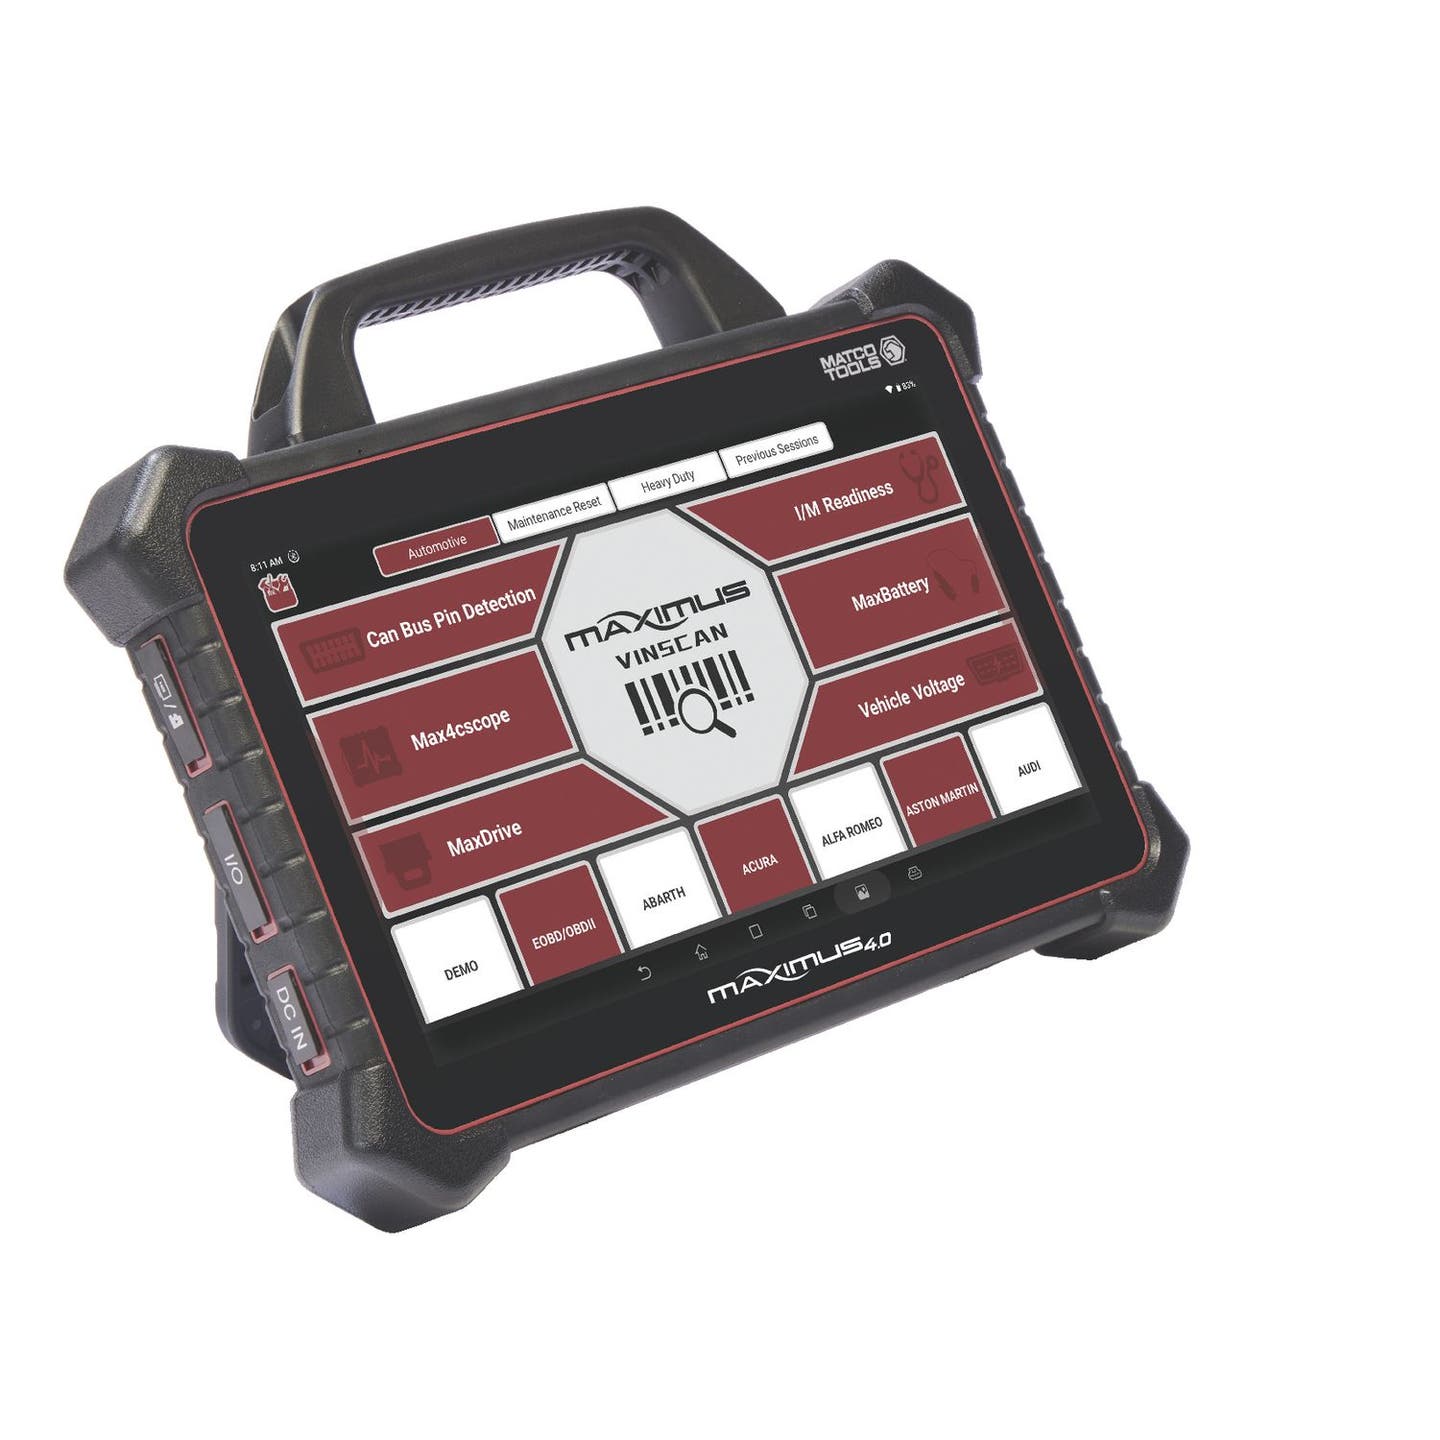 MAXIMUS 4.0 DIAGNOSTIC SCAN TOOL WITH HEAVY-DUTY SOFTWARE